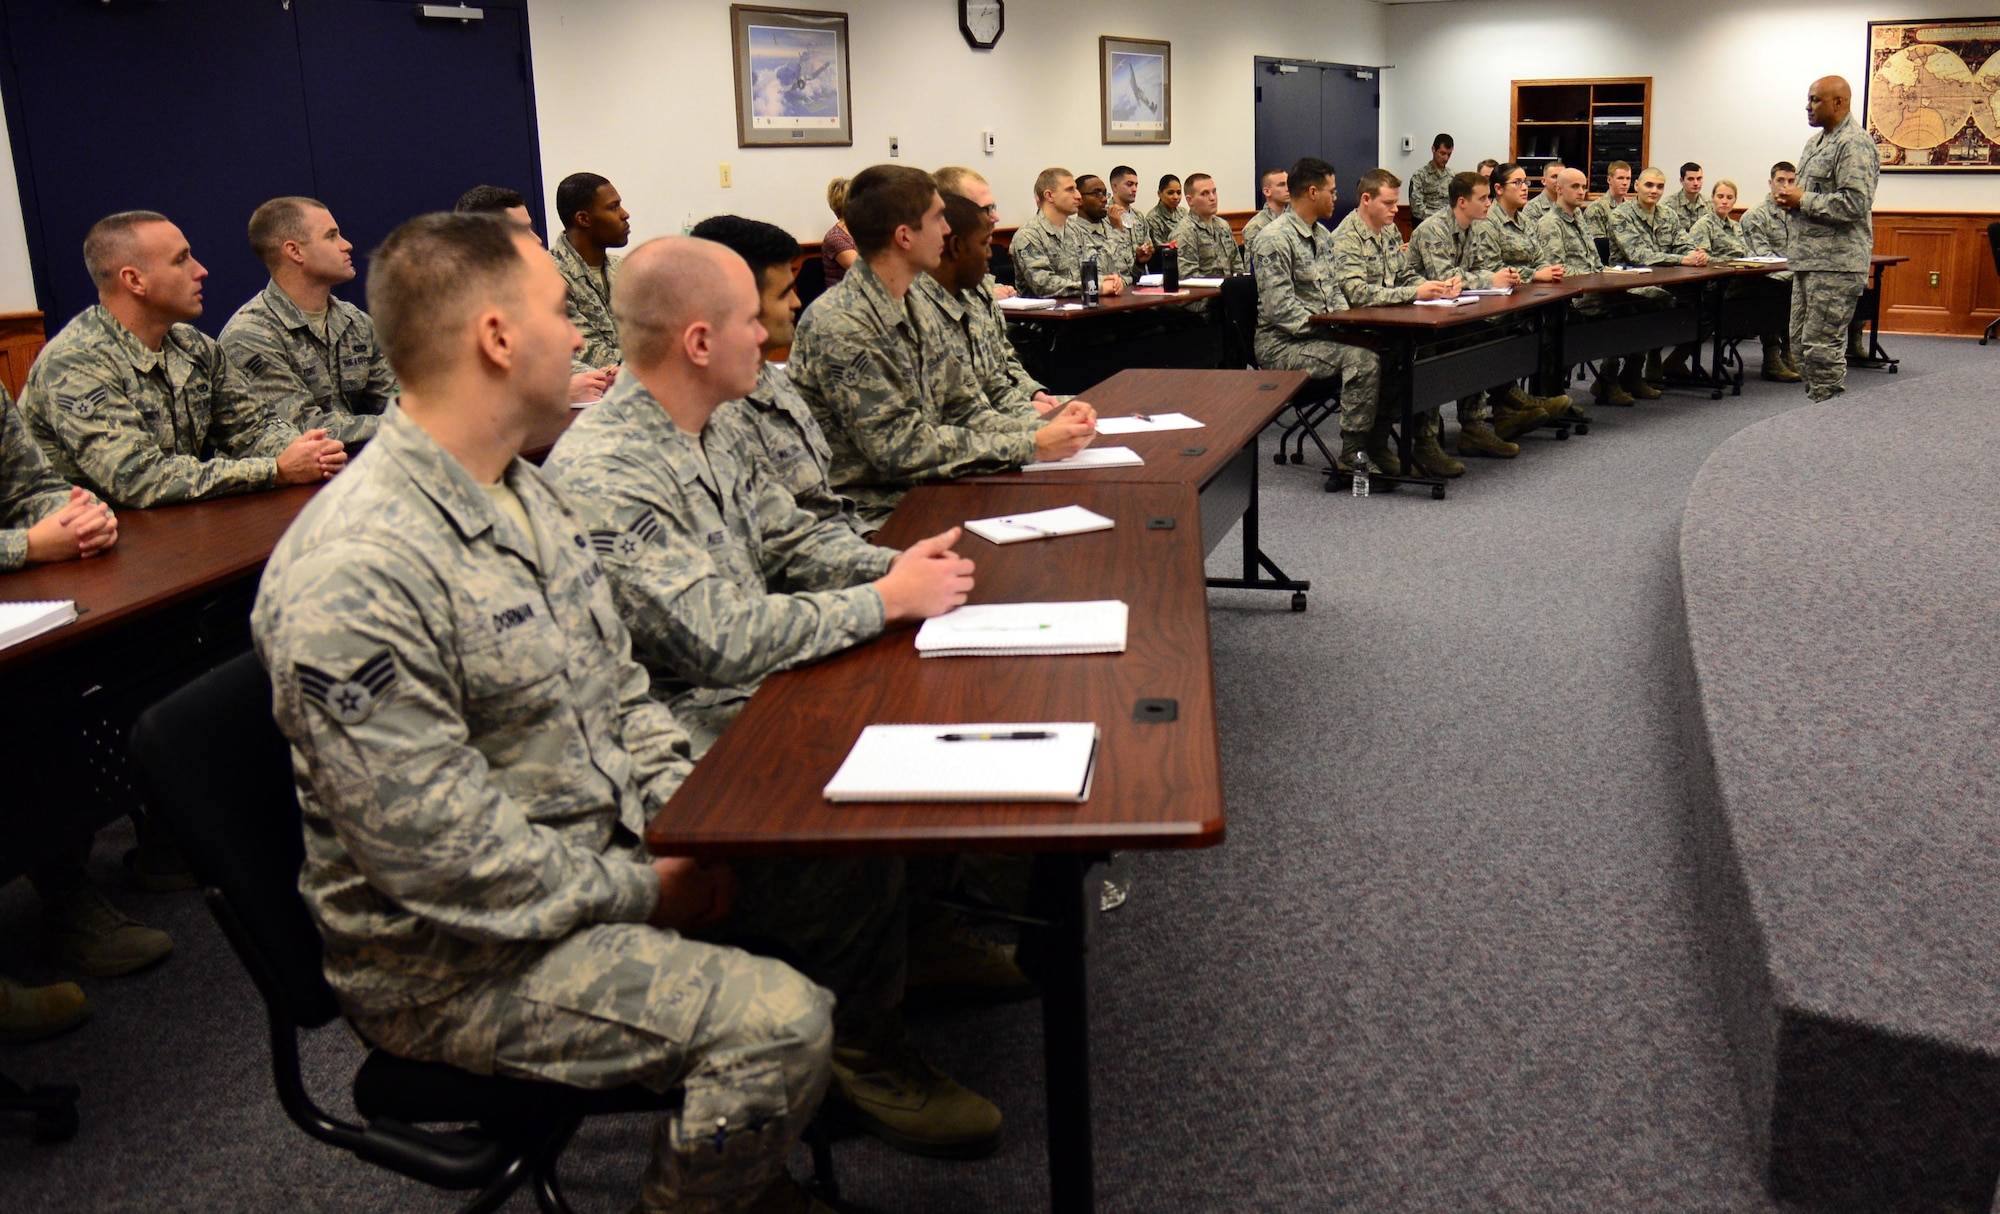 Maj. Gen. Anthony Cotton, 20th Air Force commander, discusses his views on the nation’s defense Dec. 7, 2015, with students of Airman Leaderships Class 16-B at Malmstrom Air Force Base, Mont. Cotton is a former 341st Missile Wing commander, and now leads the nation's land based intercontinental ballistic missile force. (U.S. Air Force photo/Airman 1st Class Magen M. Reeves)